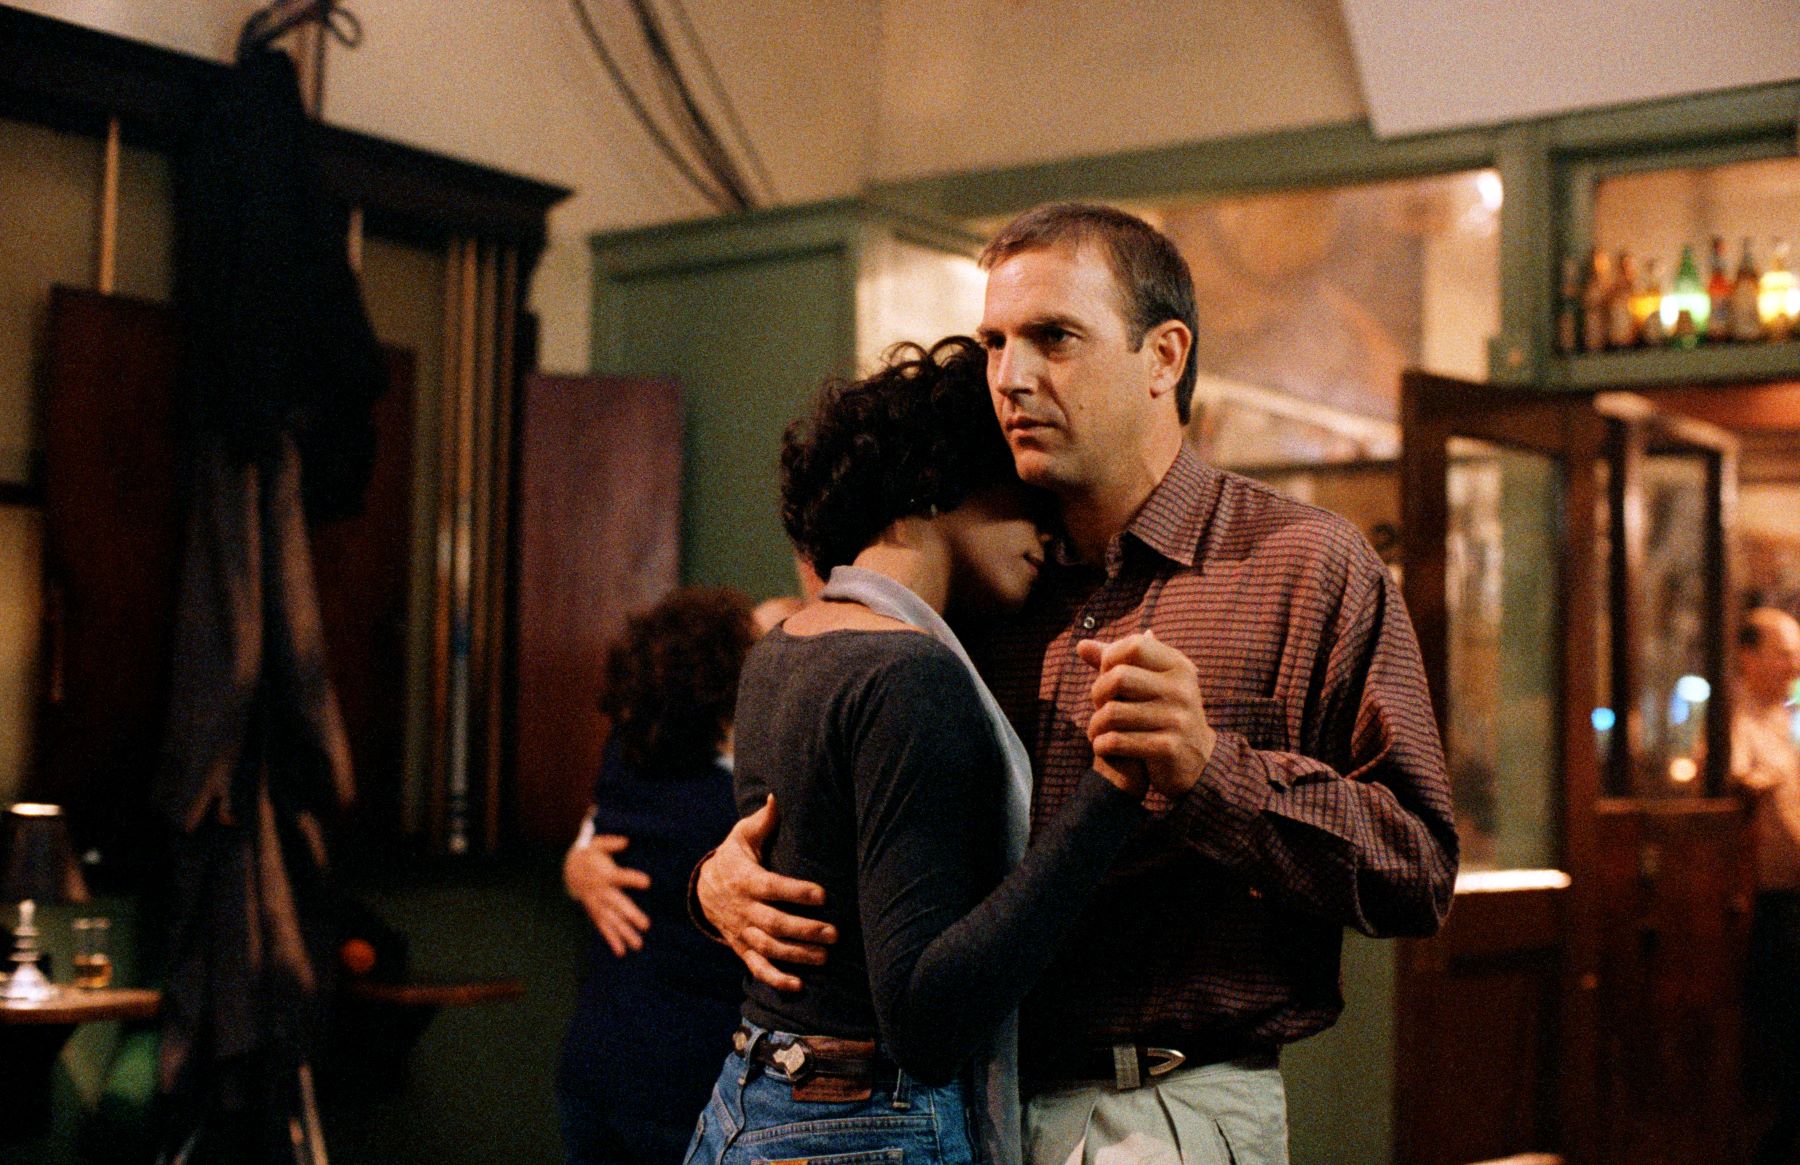 The Bodyguard 30th Anniversary: Whitney Houston and Kevin Costner